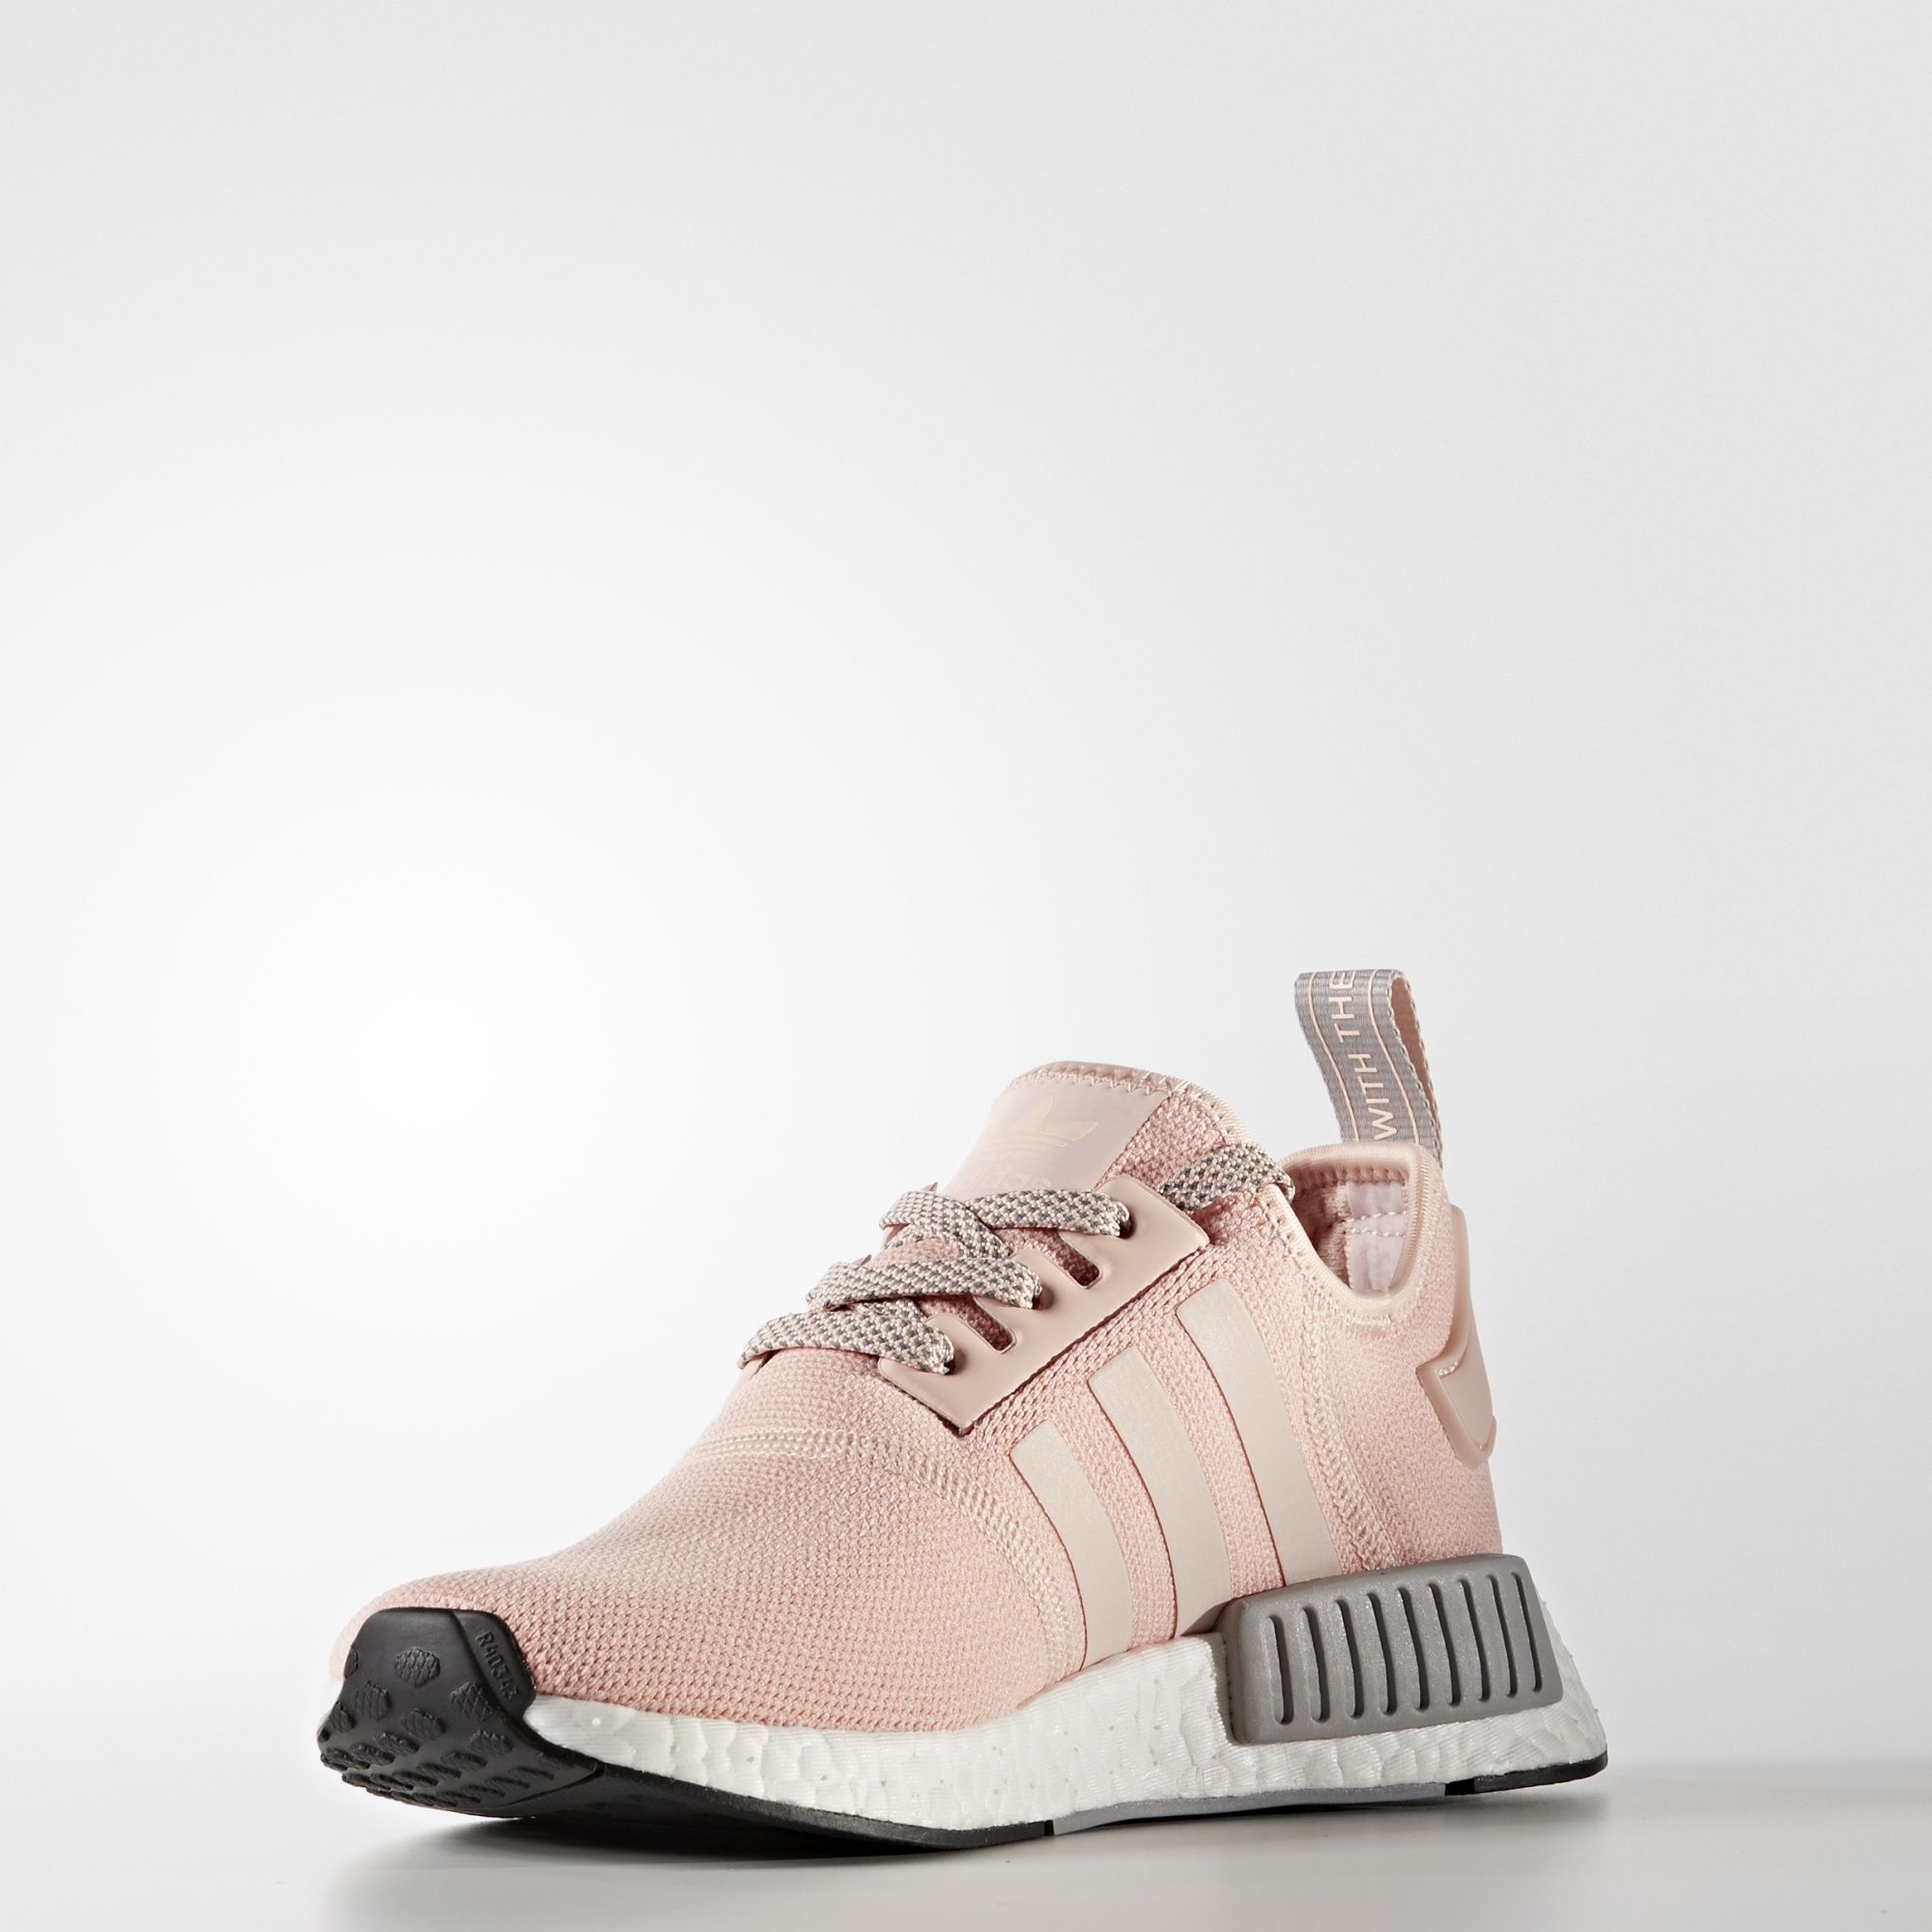 adidas-wmns-nmd_r1-vapour-pink-3